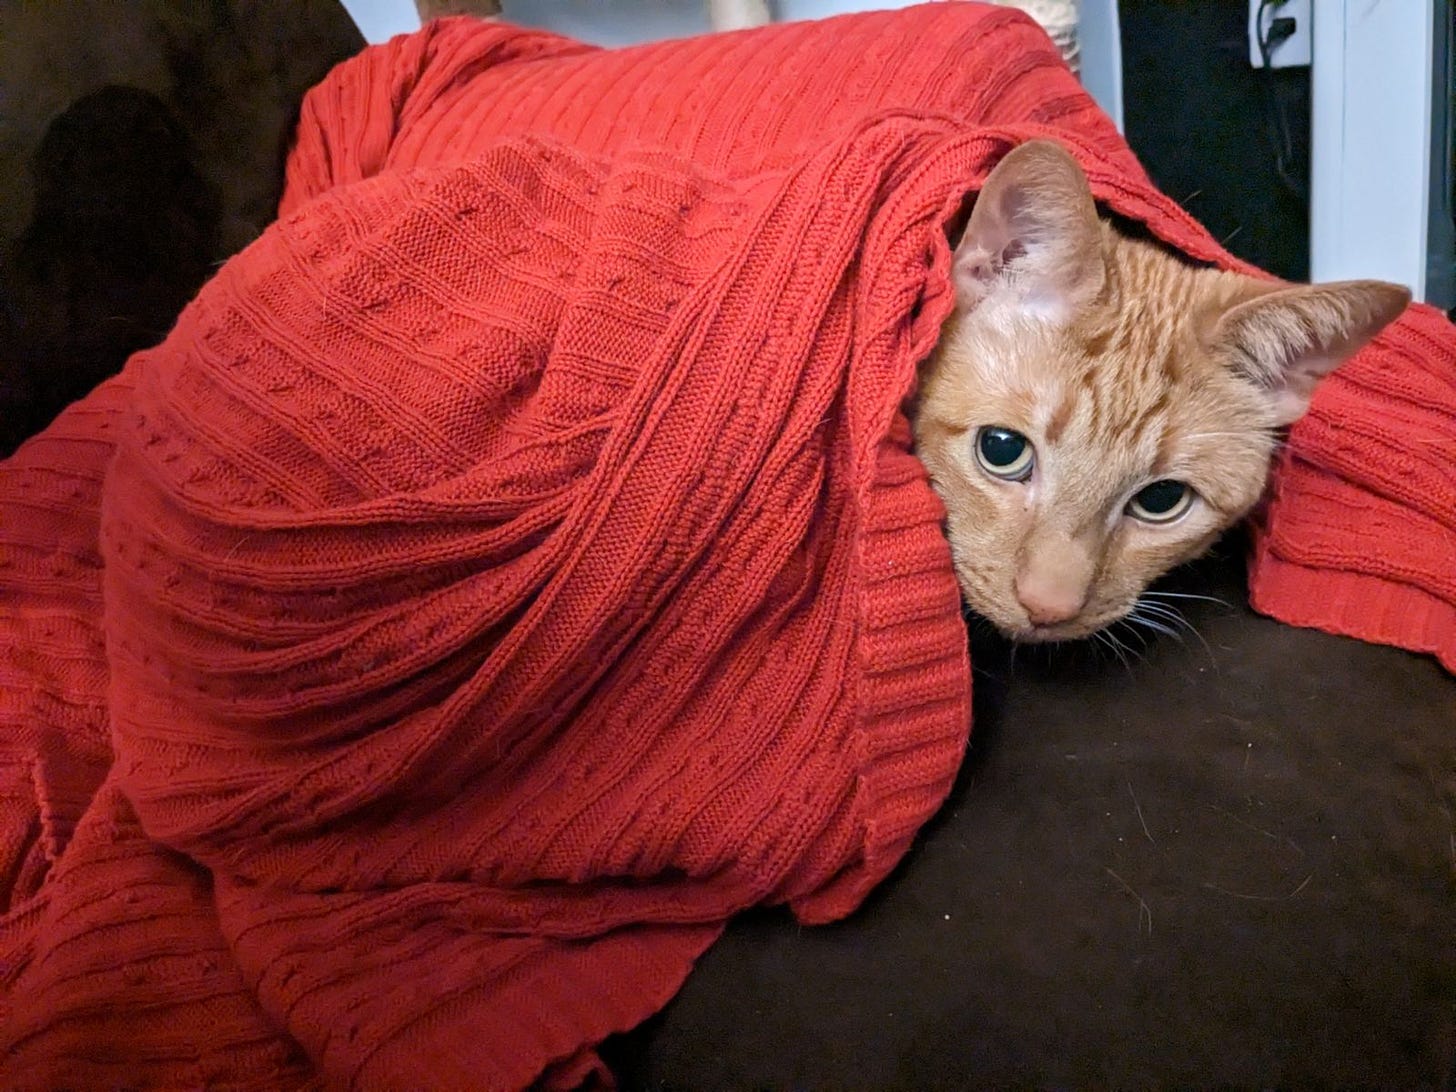 A ginger cat wrapped in a red blanket...red as a fire engine.